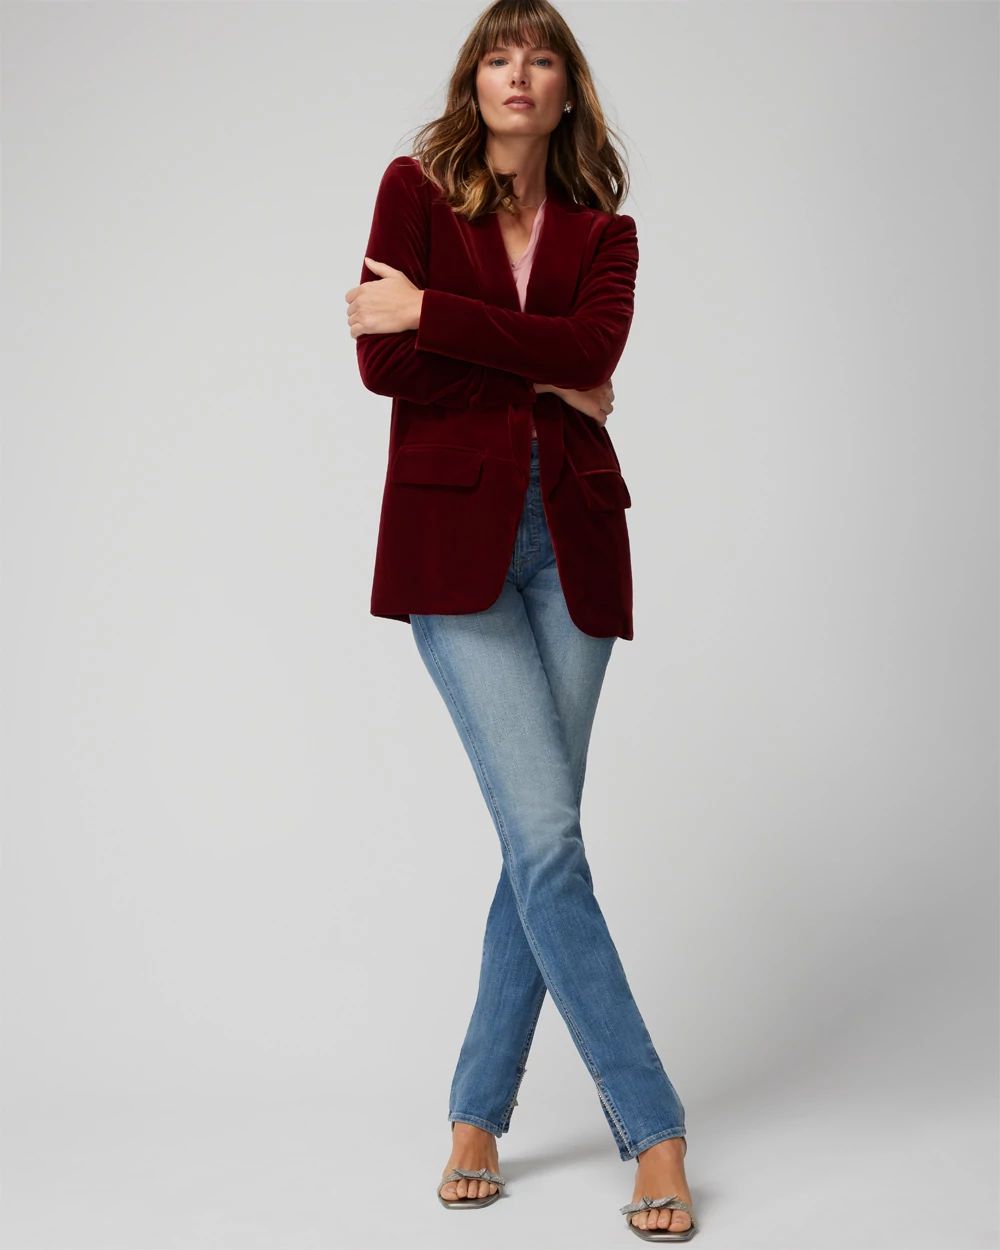 Velvet Relaxed Blazer click to view larger image.